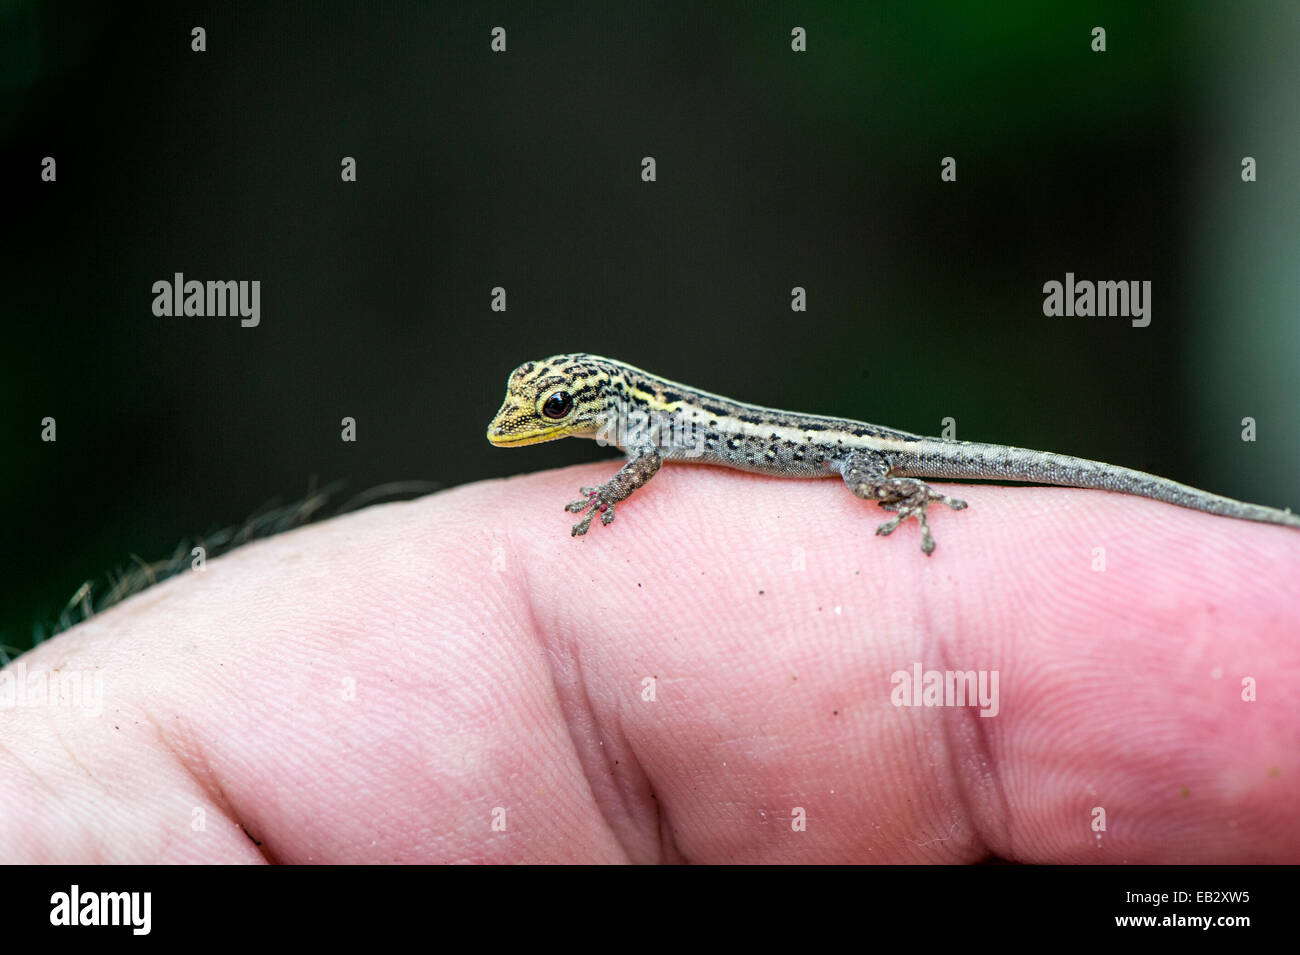 A Yellow-headed Dwarf Gecko clinging to a human fingertip with its toes. Stock Photo